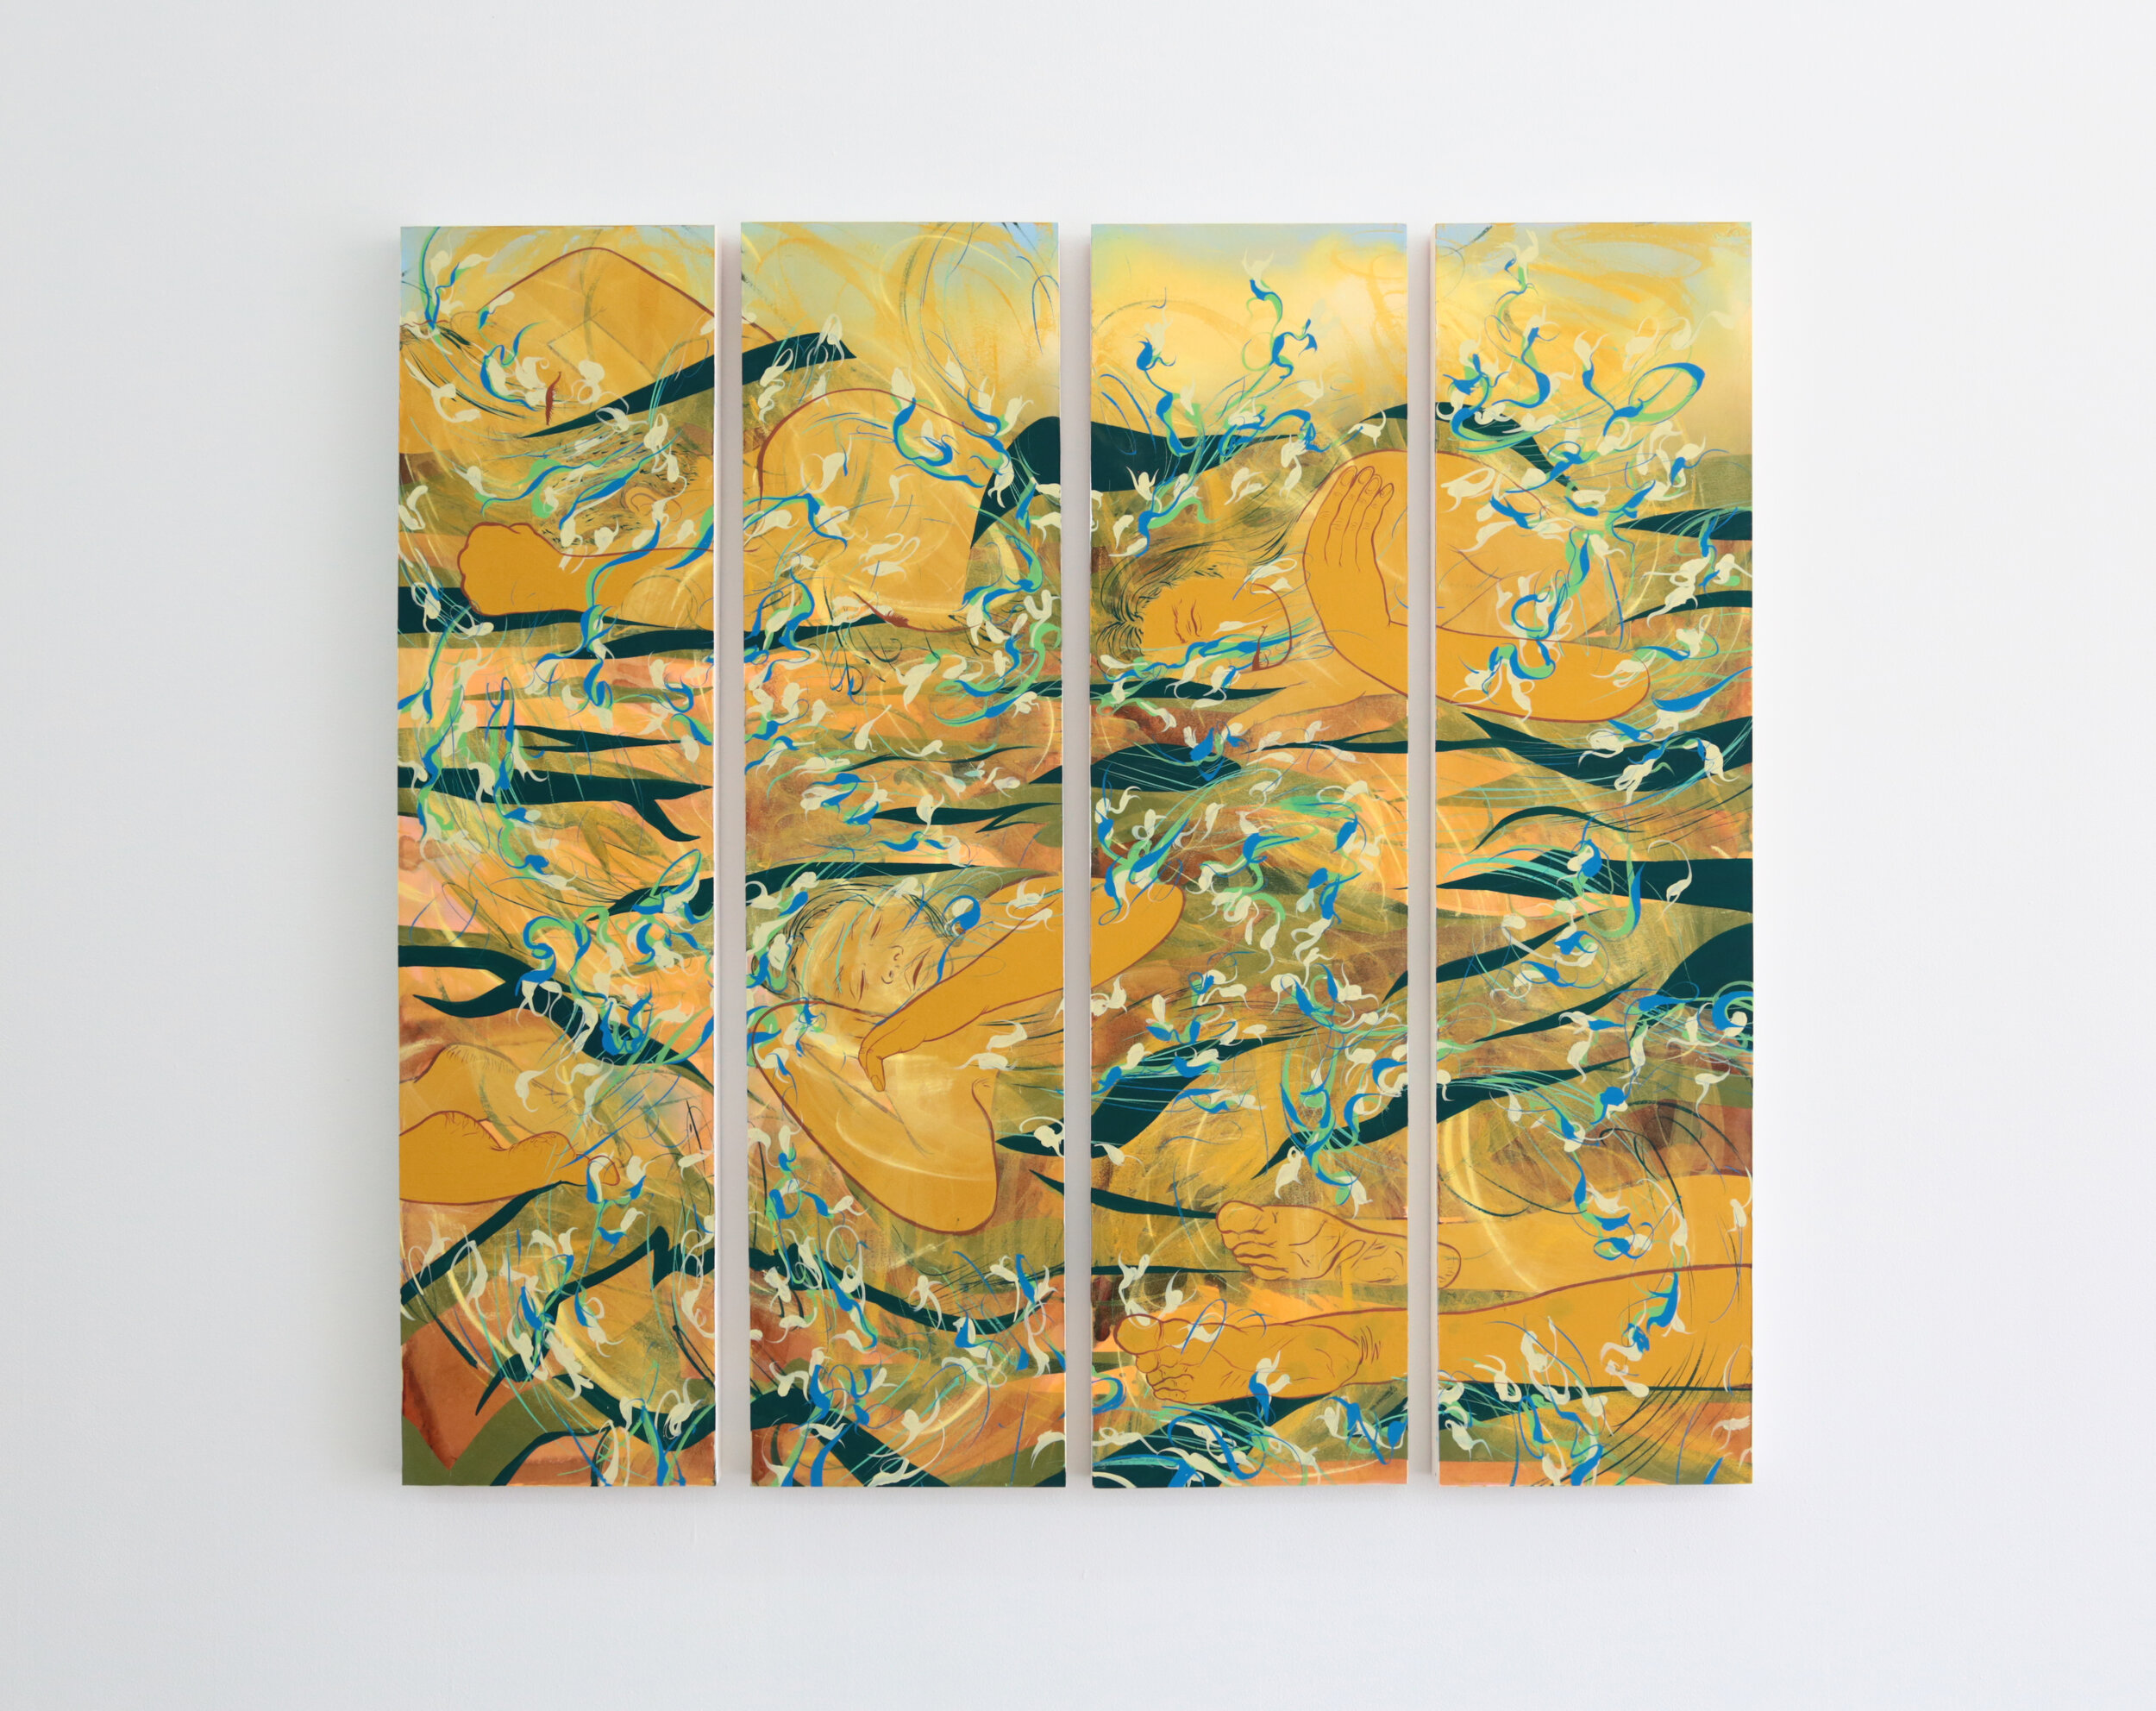   Tammy Nguyen   Dust Season  2020 Watercolor, vinyl paint, and pastel on paper, stretched over wooden panel48 x 51 inches (including 1 inch spaces between each panel) 